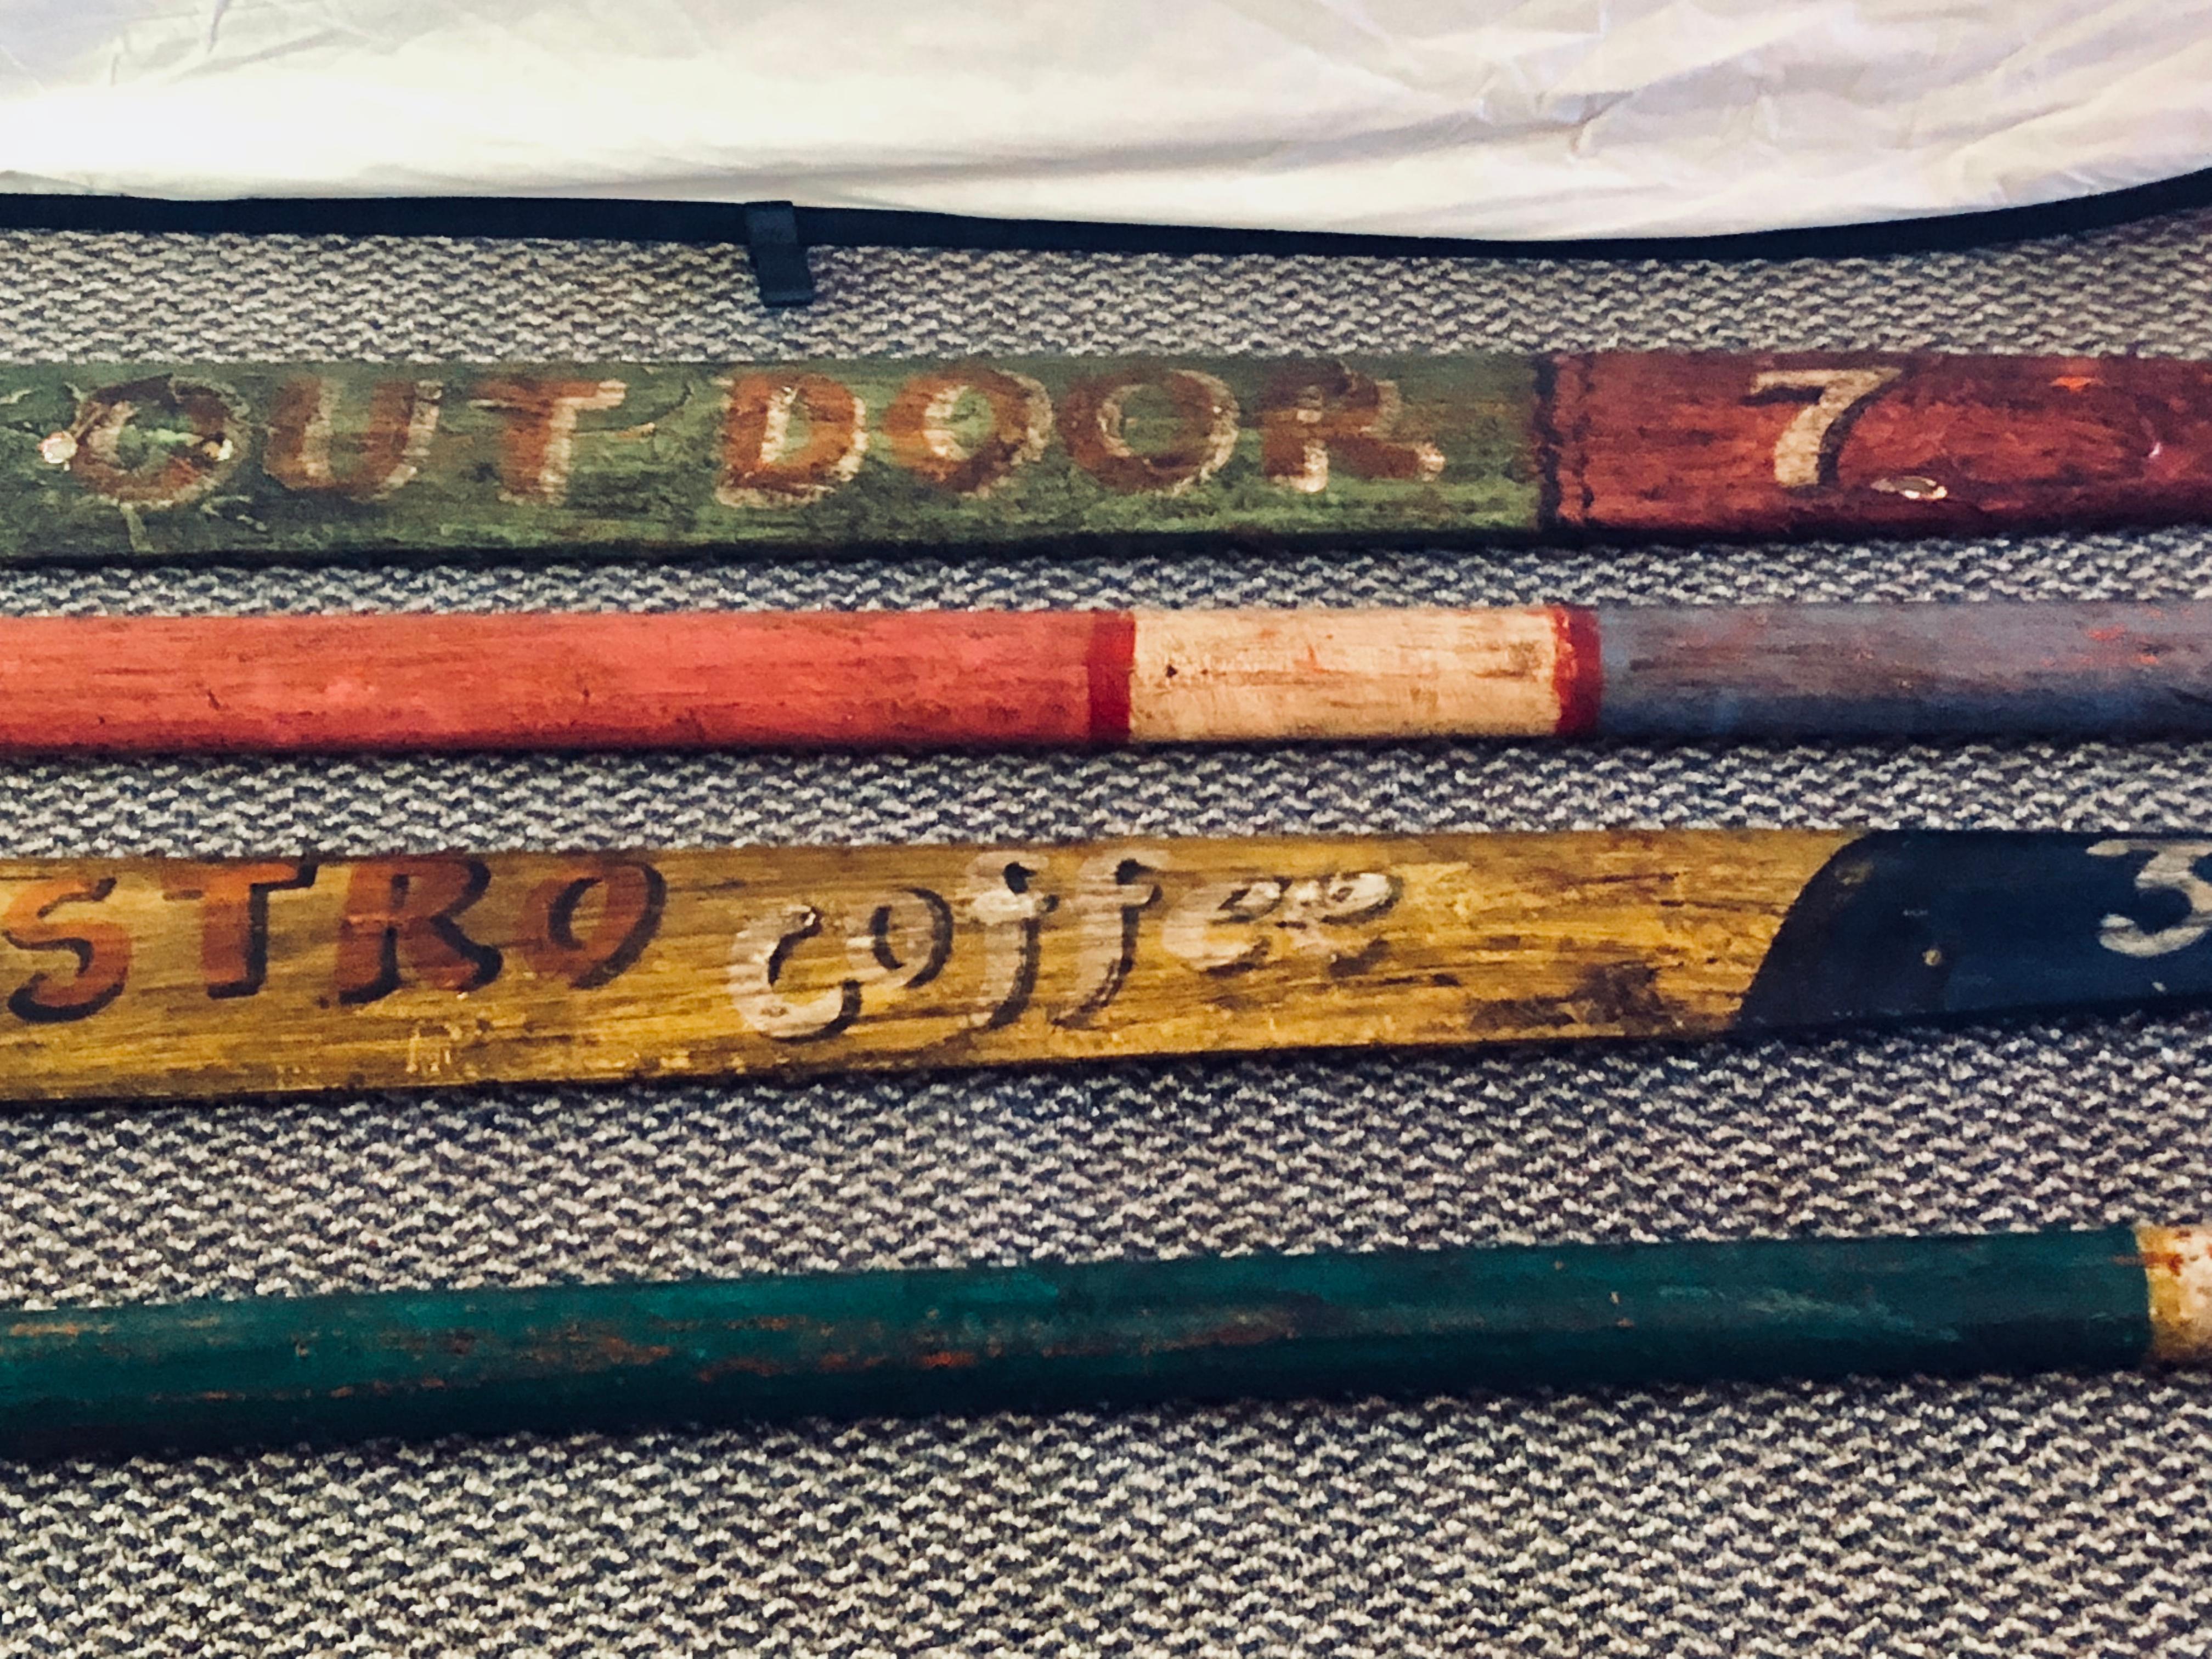 Set of 2 Hand Painted Inspirational Rowing Oars or Paddles Priced Individually In Good Condition For Sale In Stamford, CT